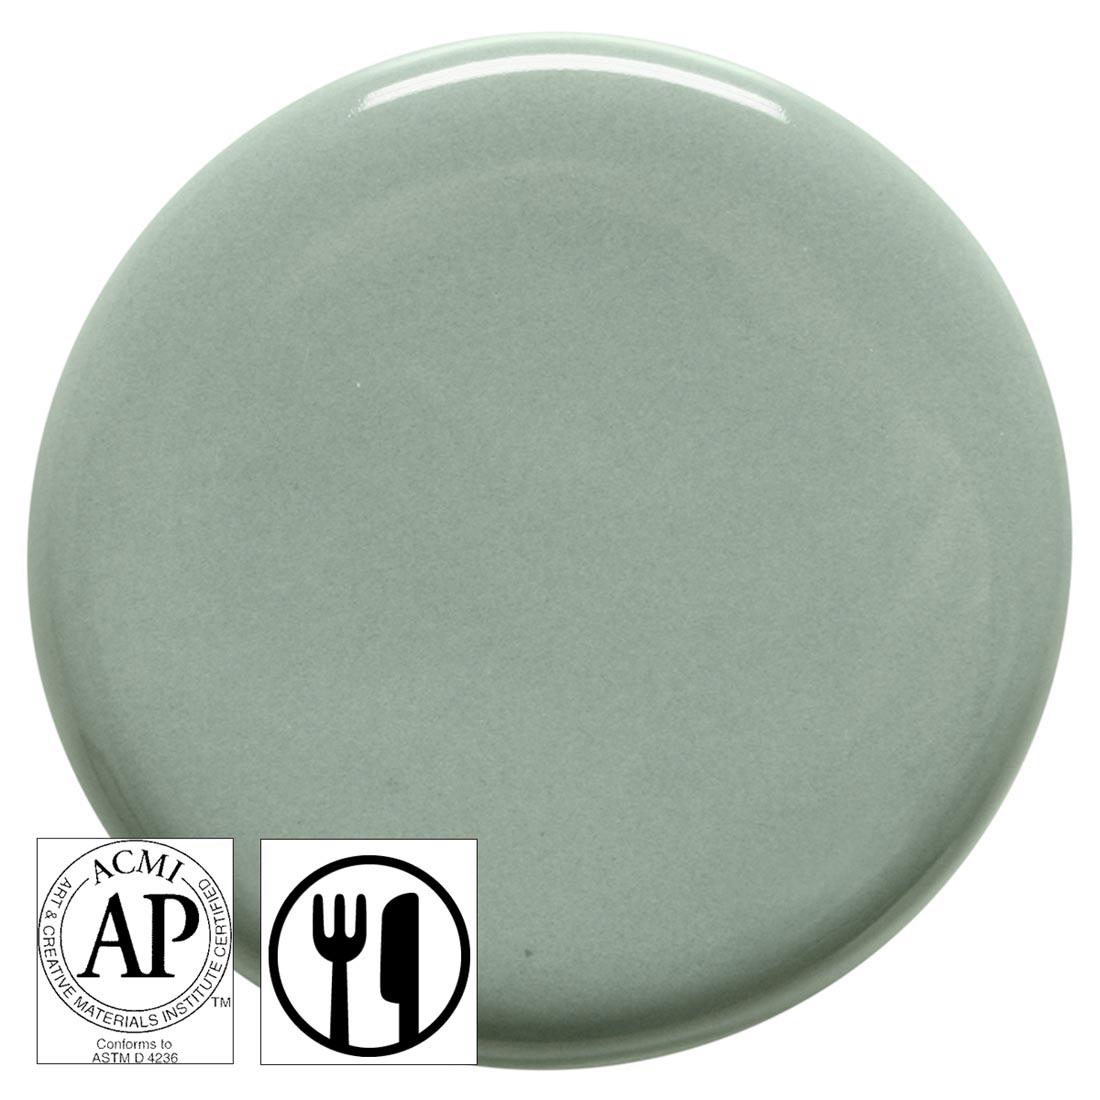 clay tile with Gray AMACO Teacher's Palette Gloss Glaze applied; symbols for AP Seal and food safe